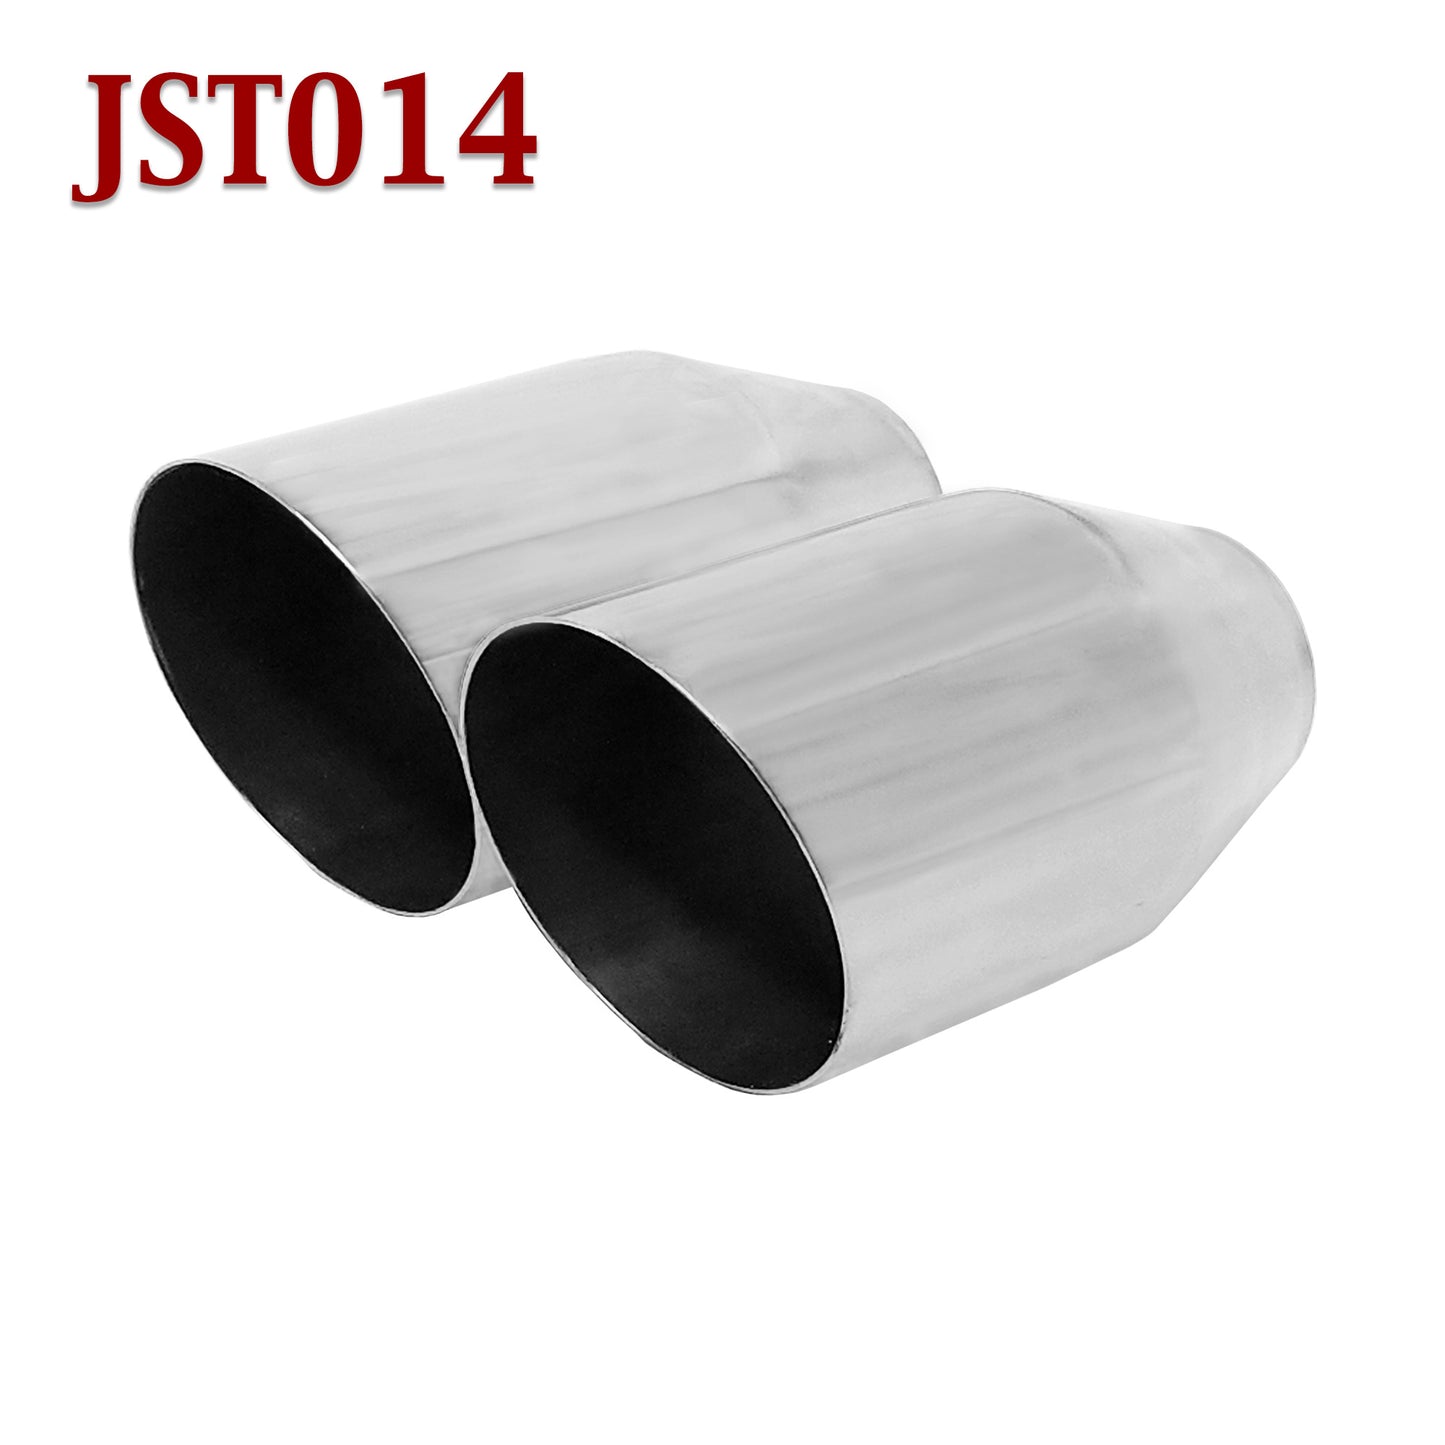 JST014 2.25" Stainless Round Oval Exhaust Tip 2 1/4" Inlet 4" Outlet 7" Long